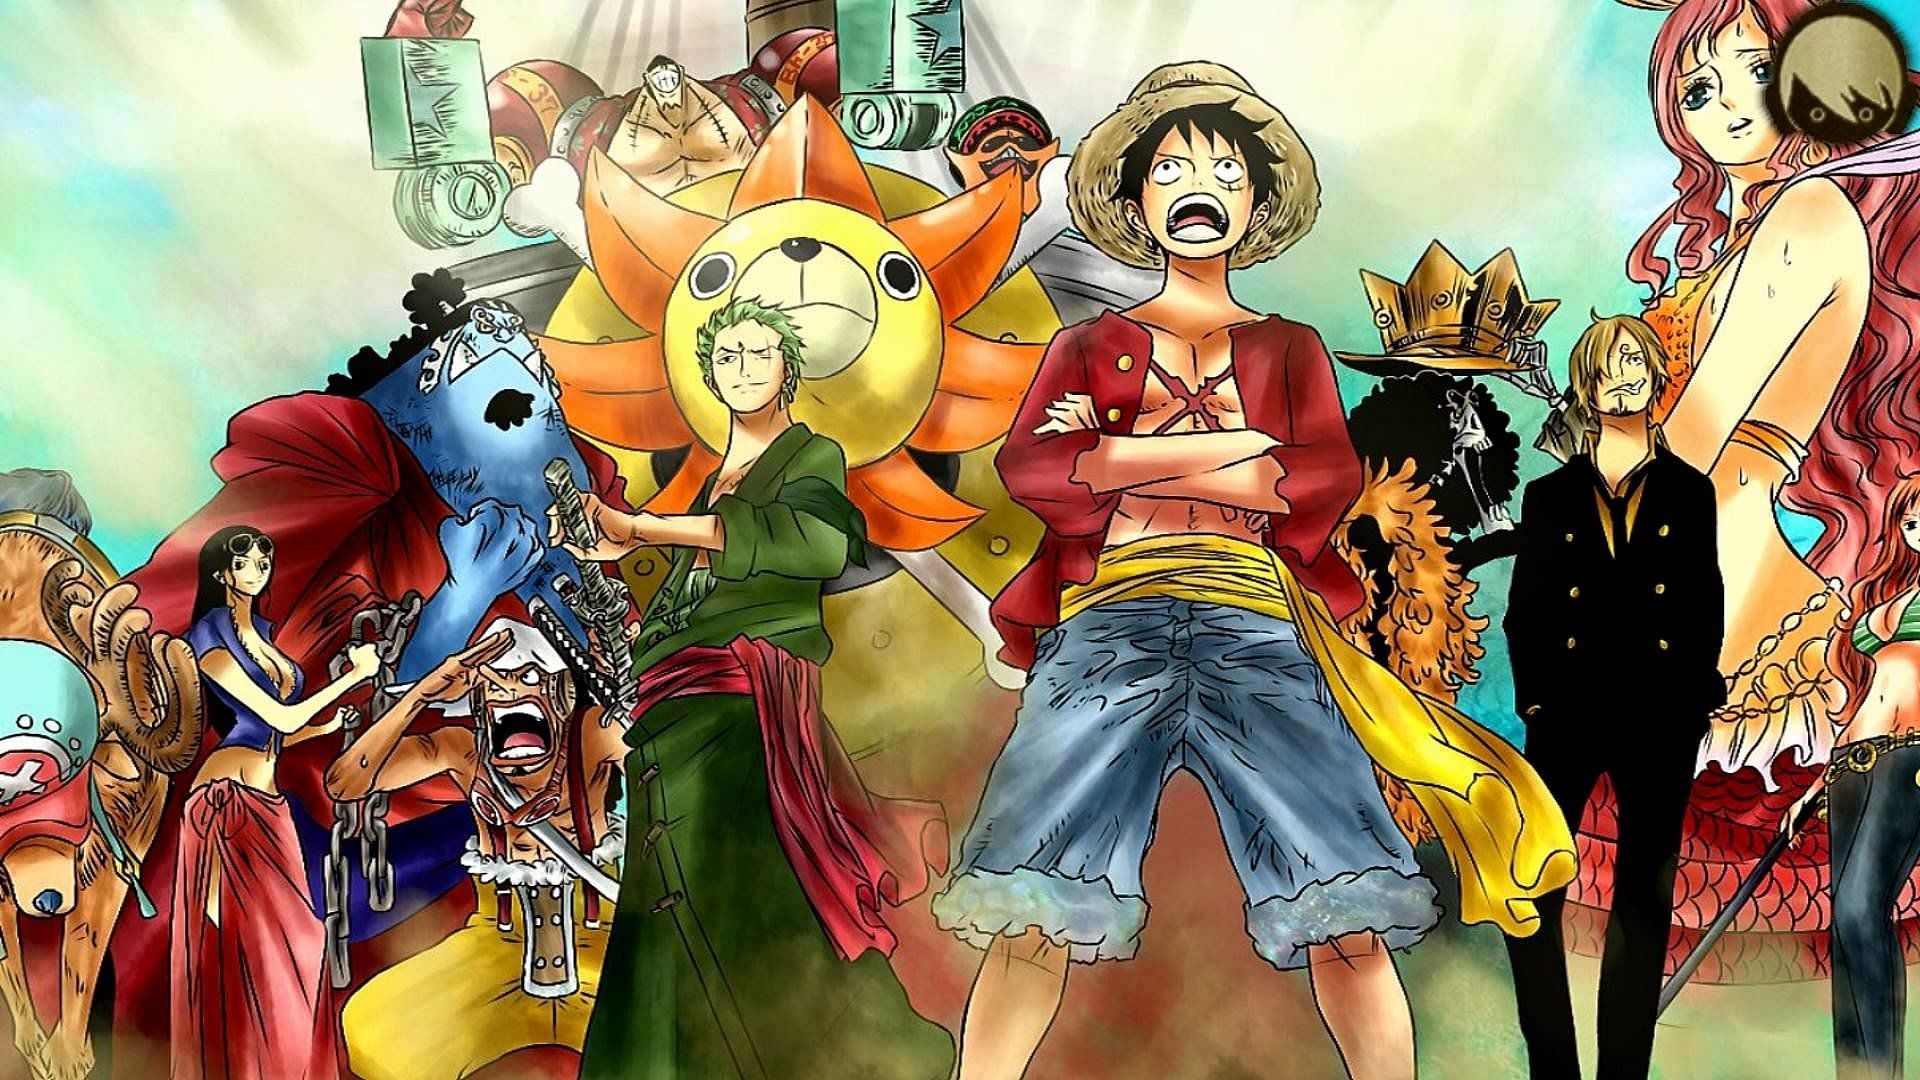 The Straw Hat crew in One Piece (Image via Pinterest)